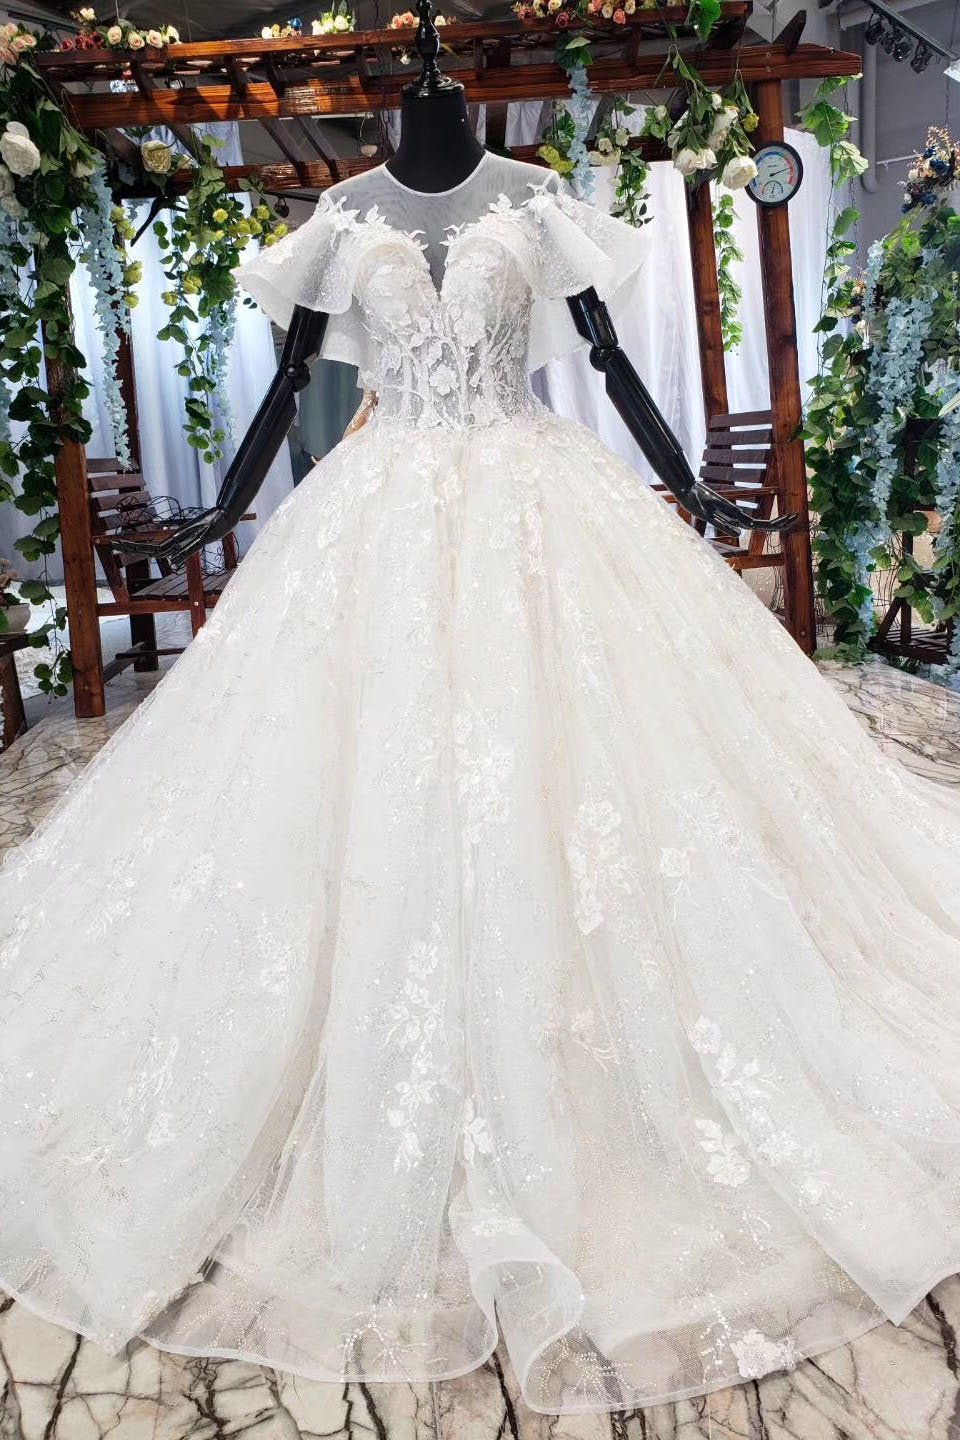 Champagne Ivory Detachable Train Lace Mermaid Wedding Dress With Pearls,  Sashes, Lace Applique, And Sheer Neckline Fashionable Bridal Gown 2019 From  Lovemydress, $130.11 | DHgate.Com